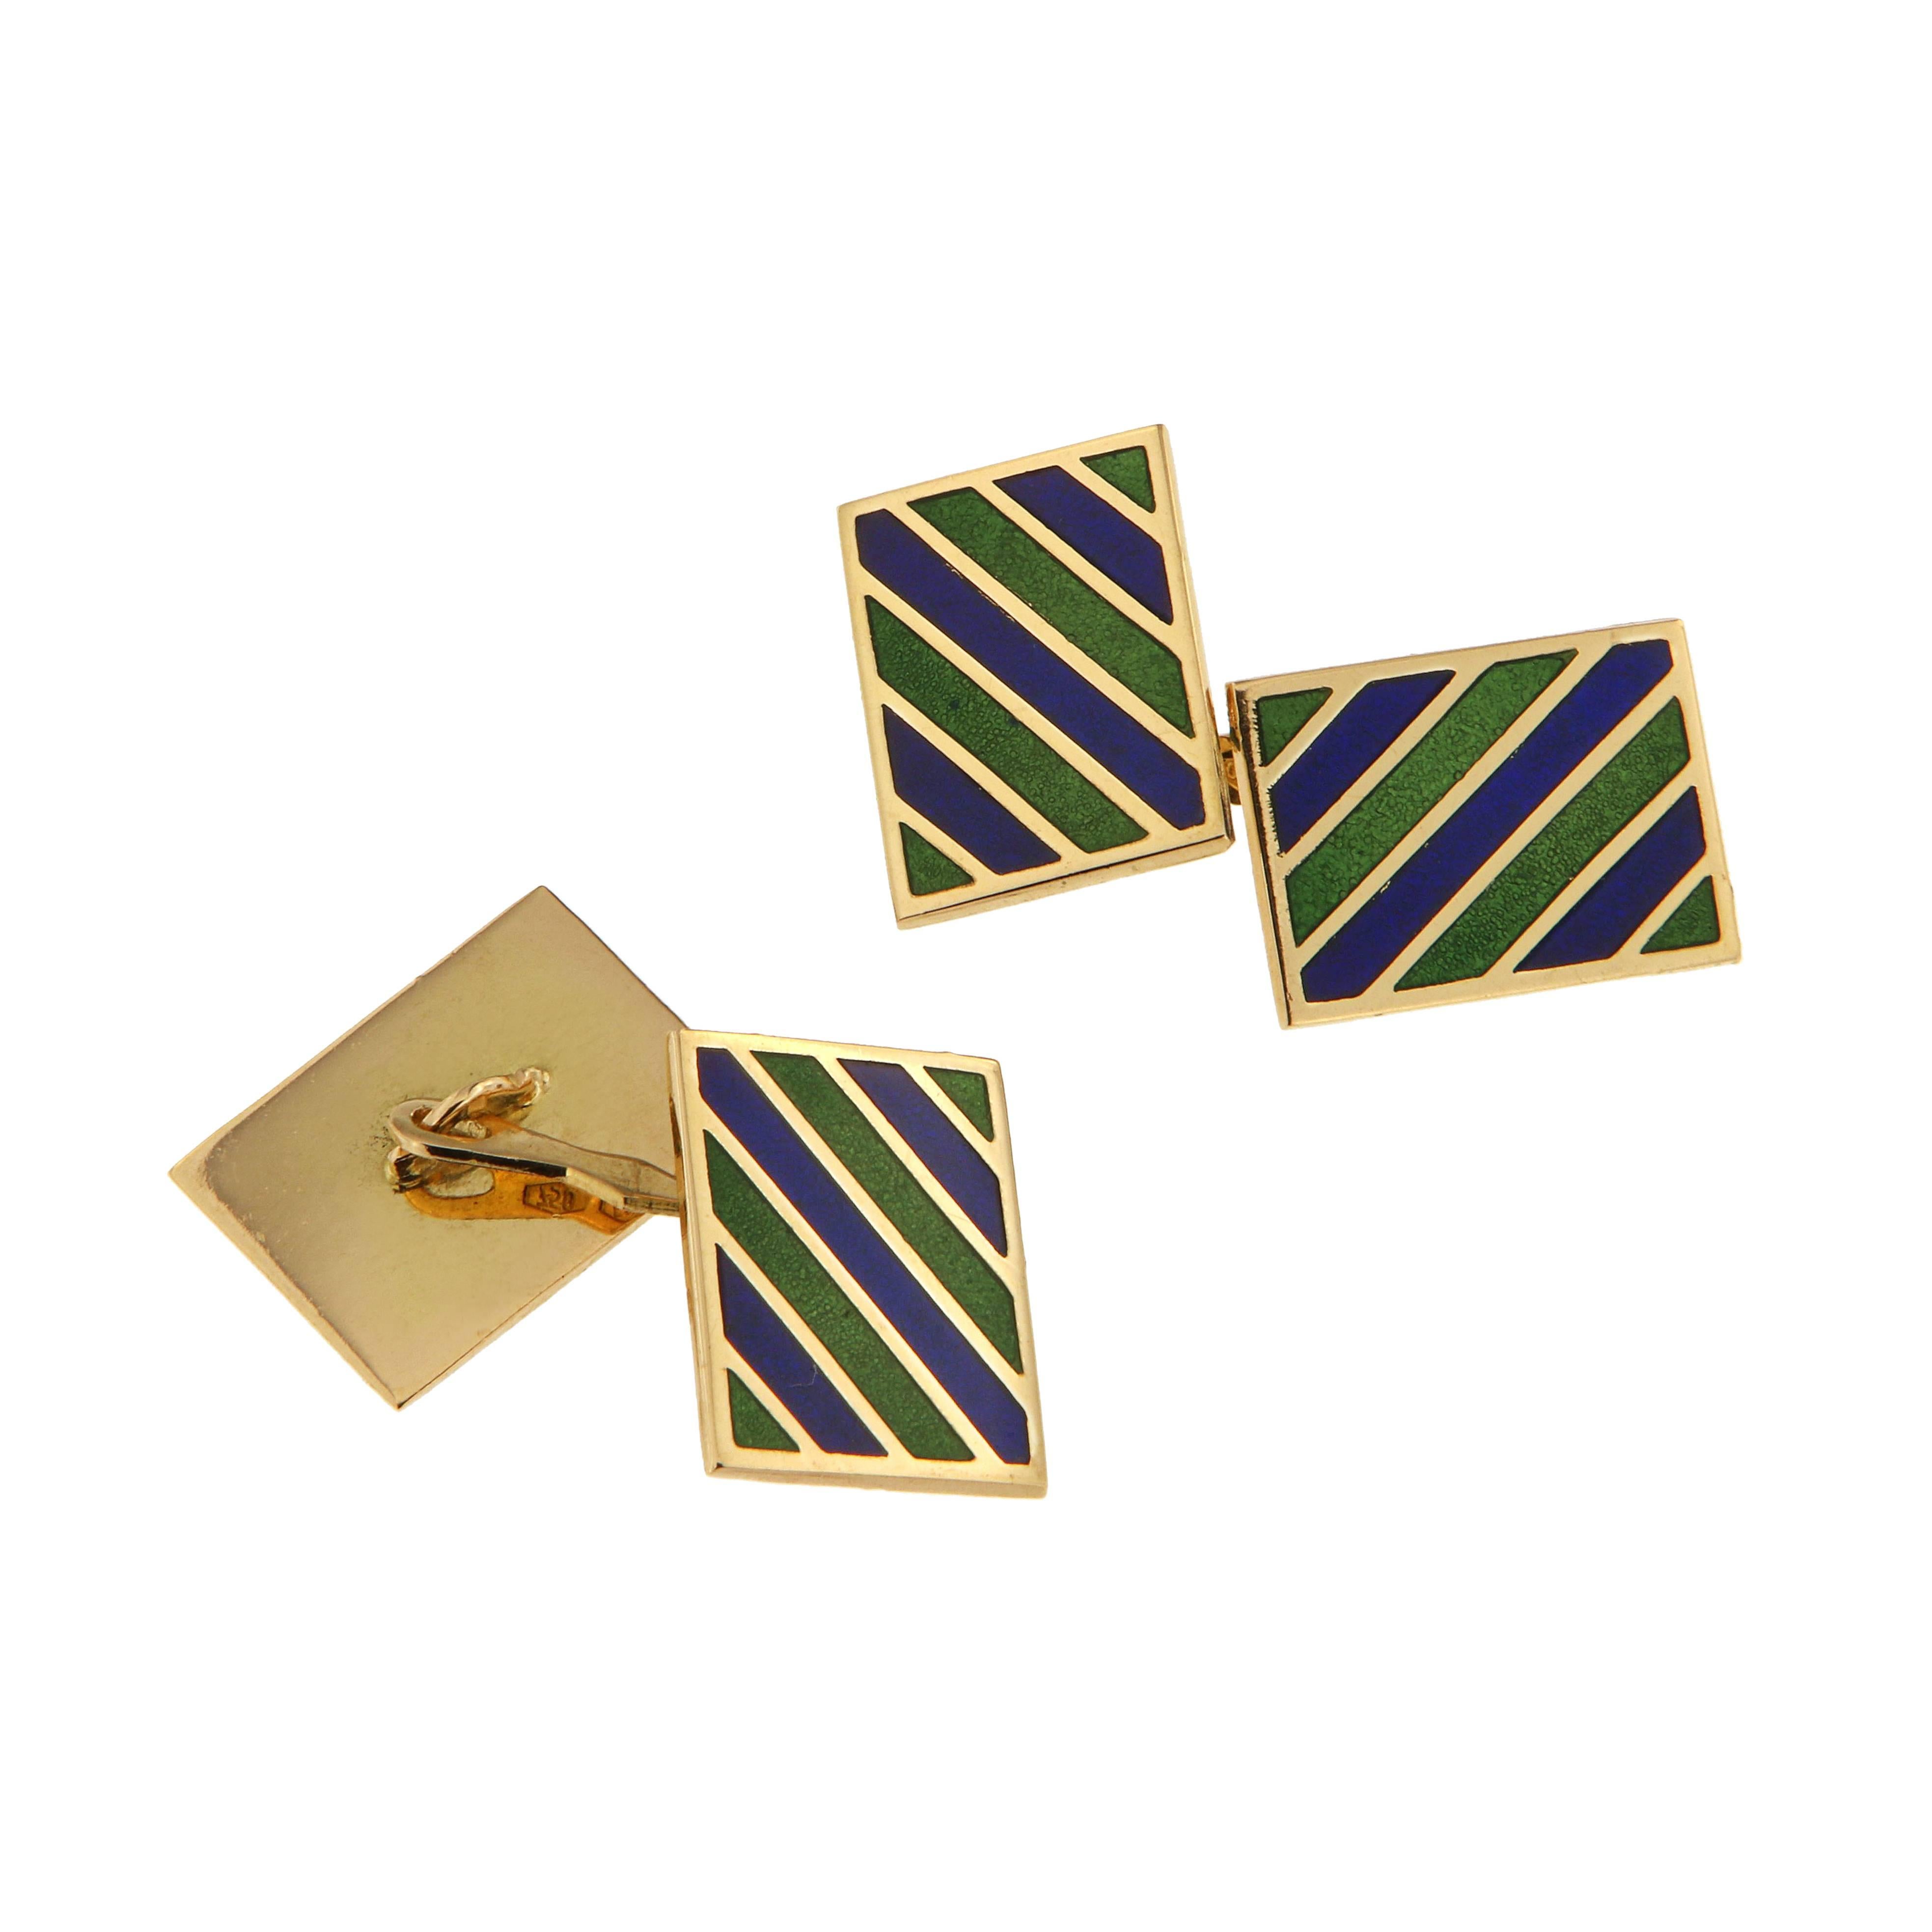 18 kt Yellow Gold Cufflinks with Blue and Green Enamel are made in Italy.
The dimensions are 18 X 15 millimeters = 0.708 x 0.591 inches.
It are stamped with the Italian Mark 750
Ready for delivery. It can be shipped with express delivery on